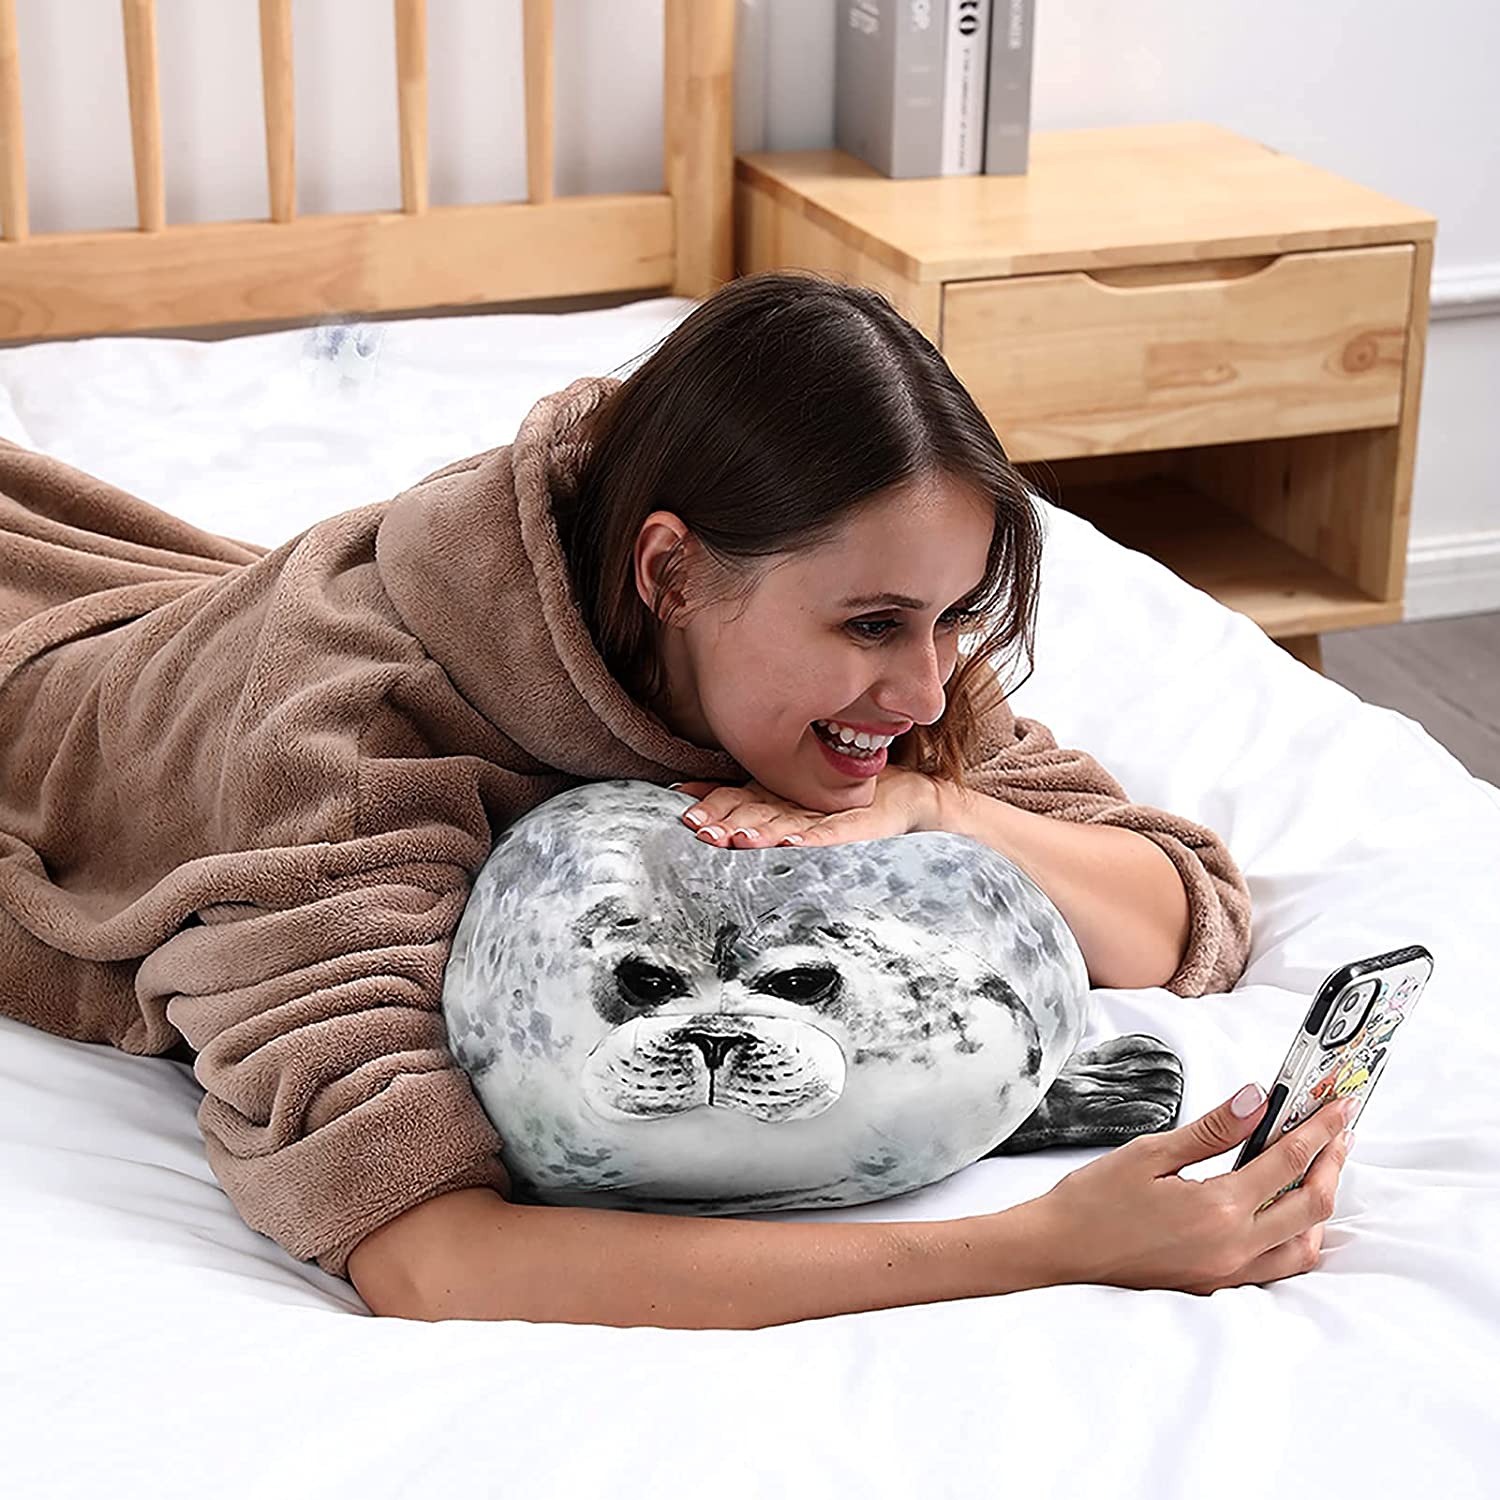 Woman laying on a bed while on the phone and cuddling with a seal pillow